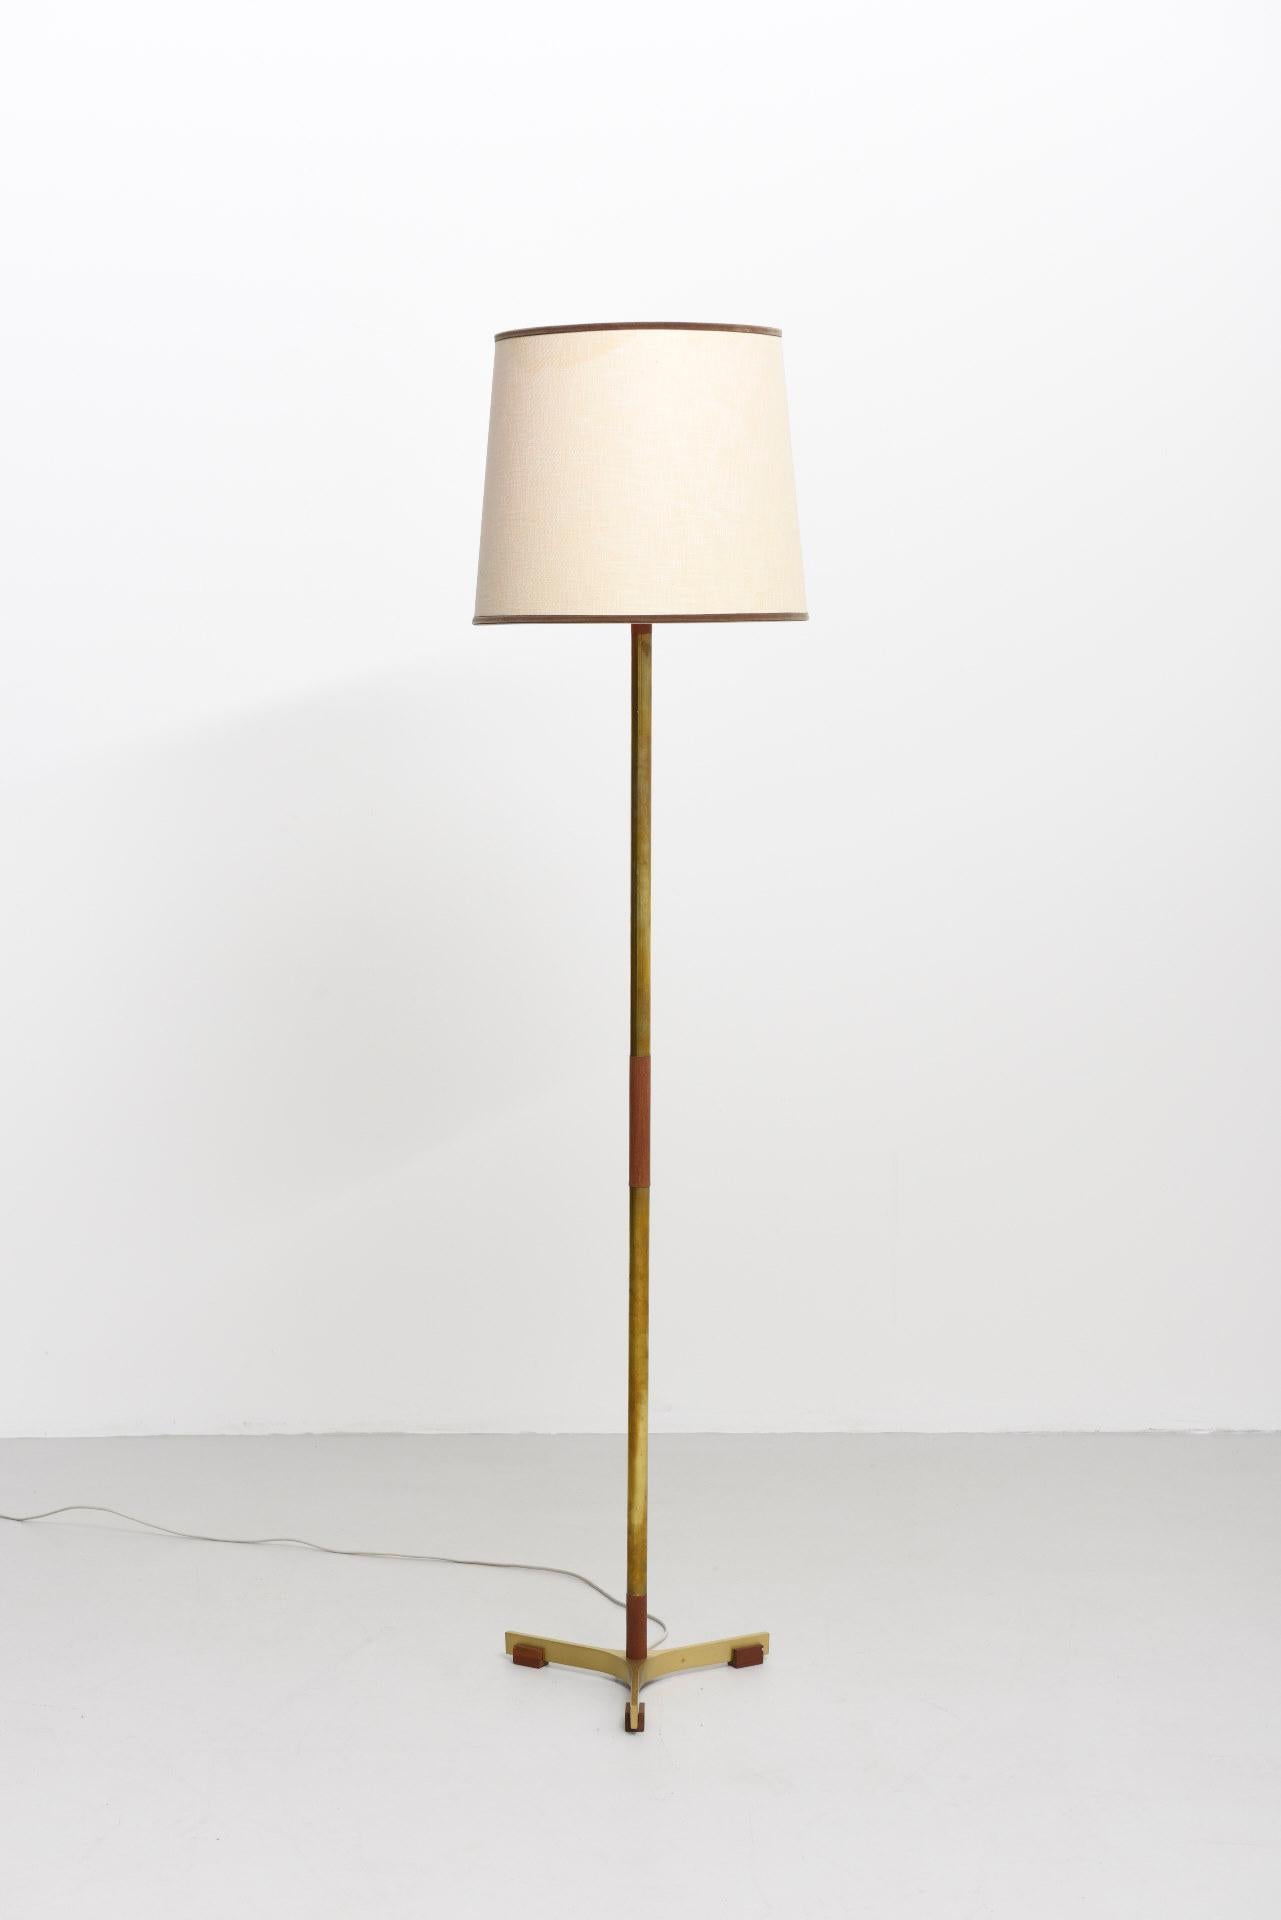 'Monolit’ floor lamp in brass and teak, with the original lampshade.
Design by Jo Hammerborg, produced by Fog & Mørup in Denmark.